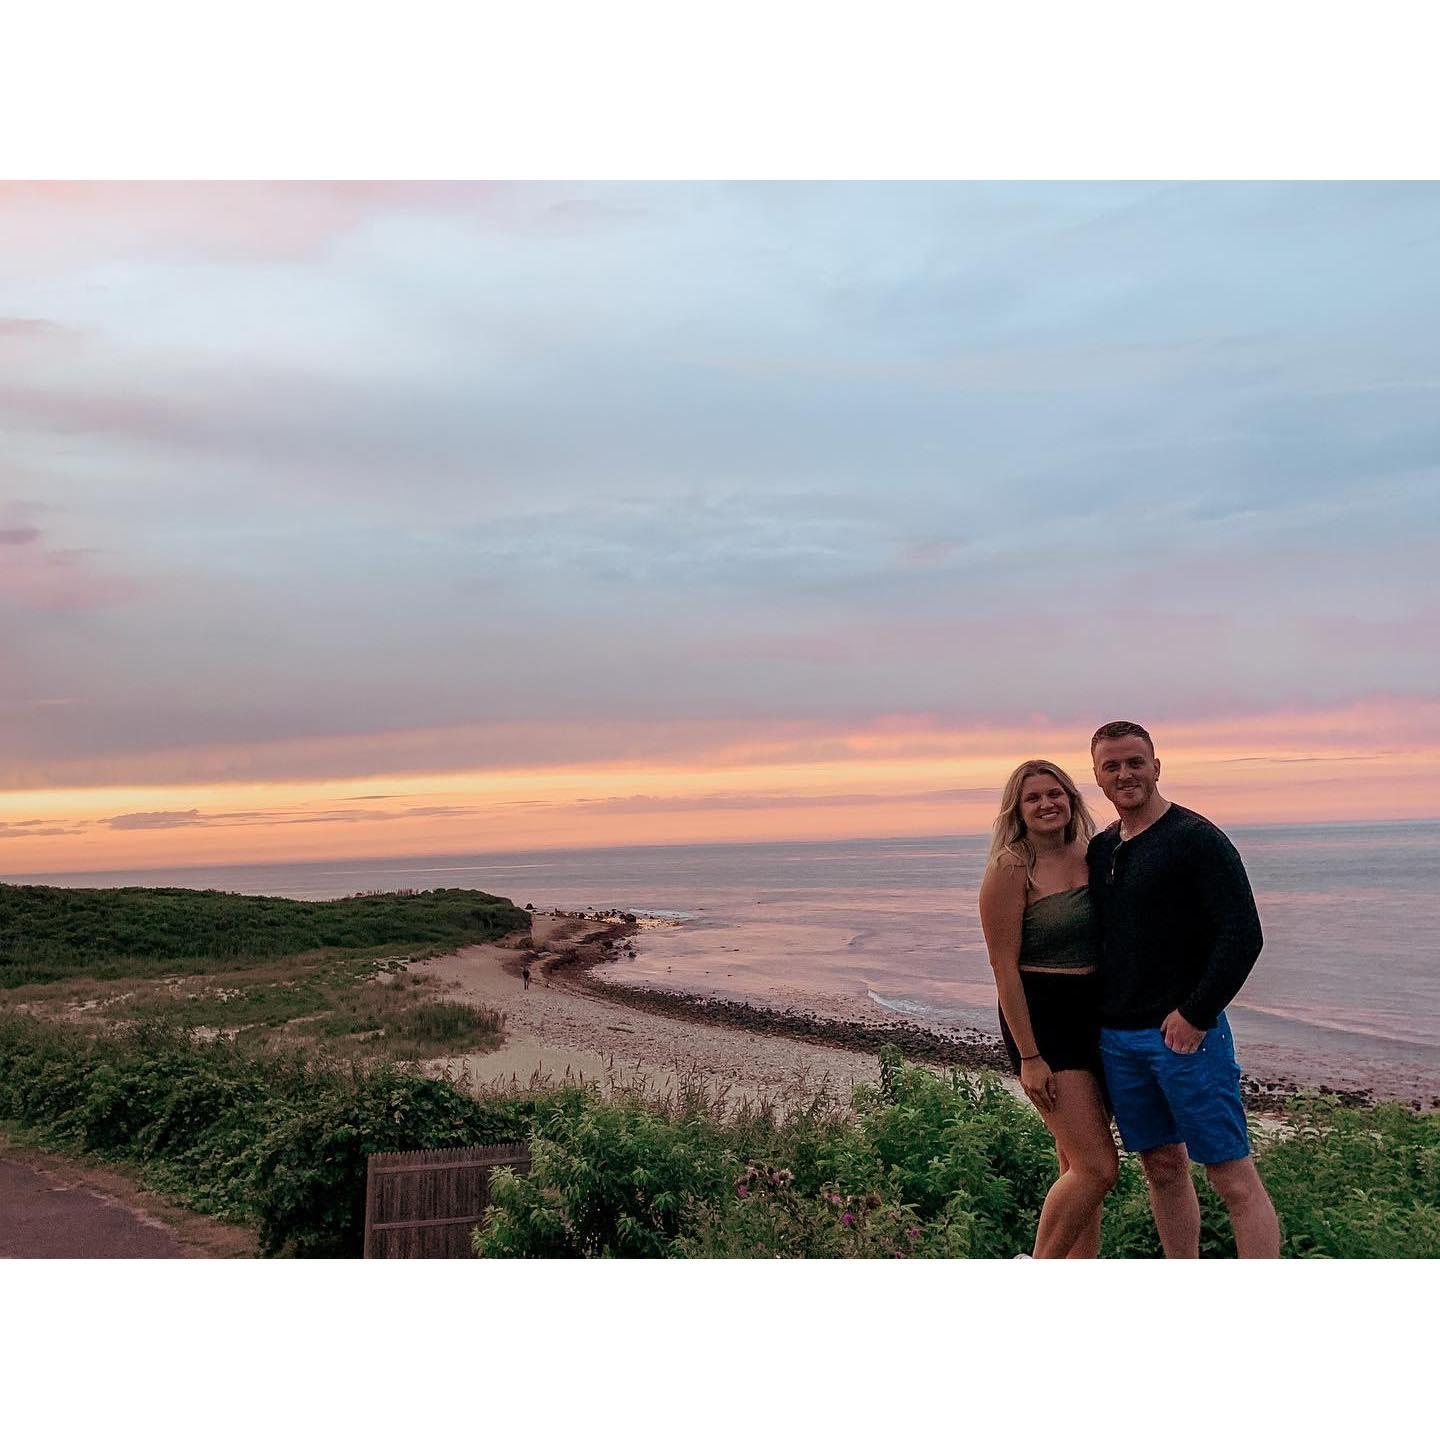 One of our first dates in Montauk! August 2020